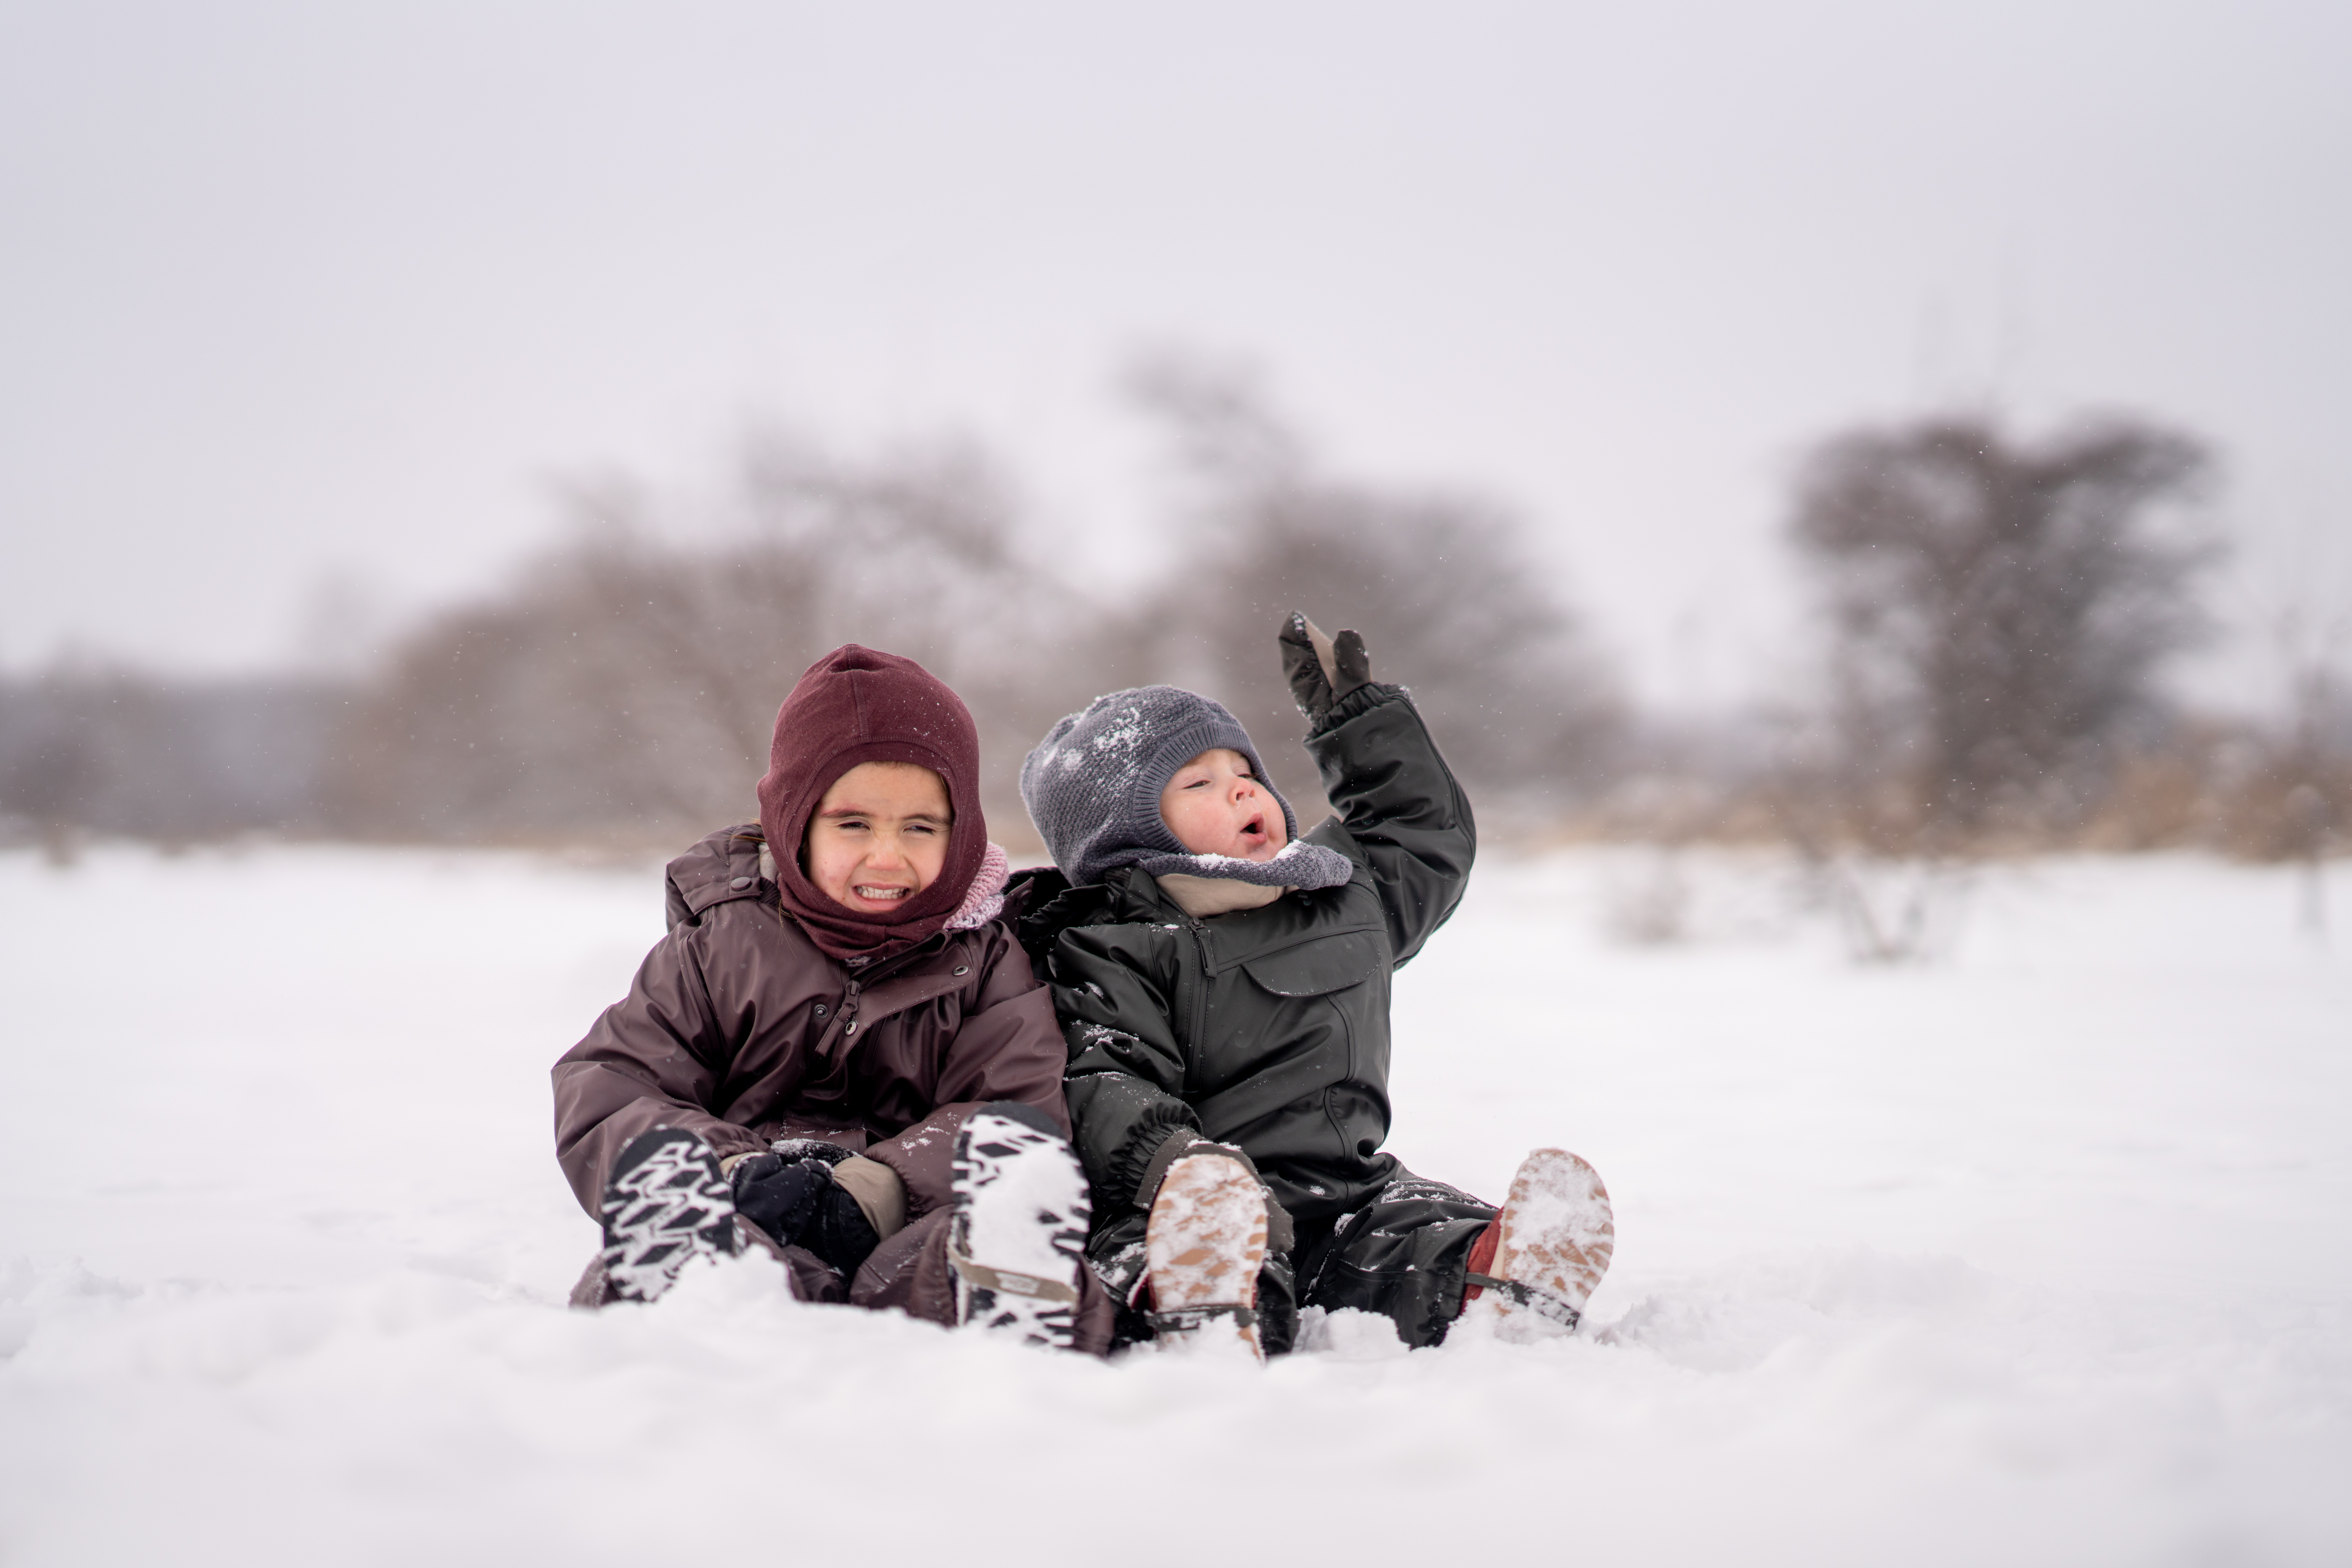 Winter Portraits | Source: Getty Images